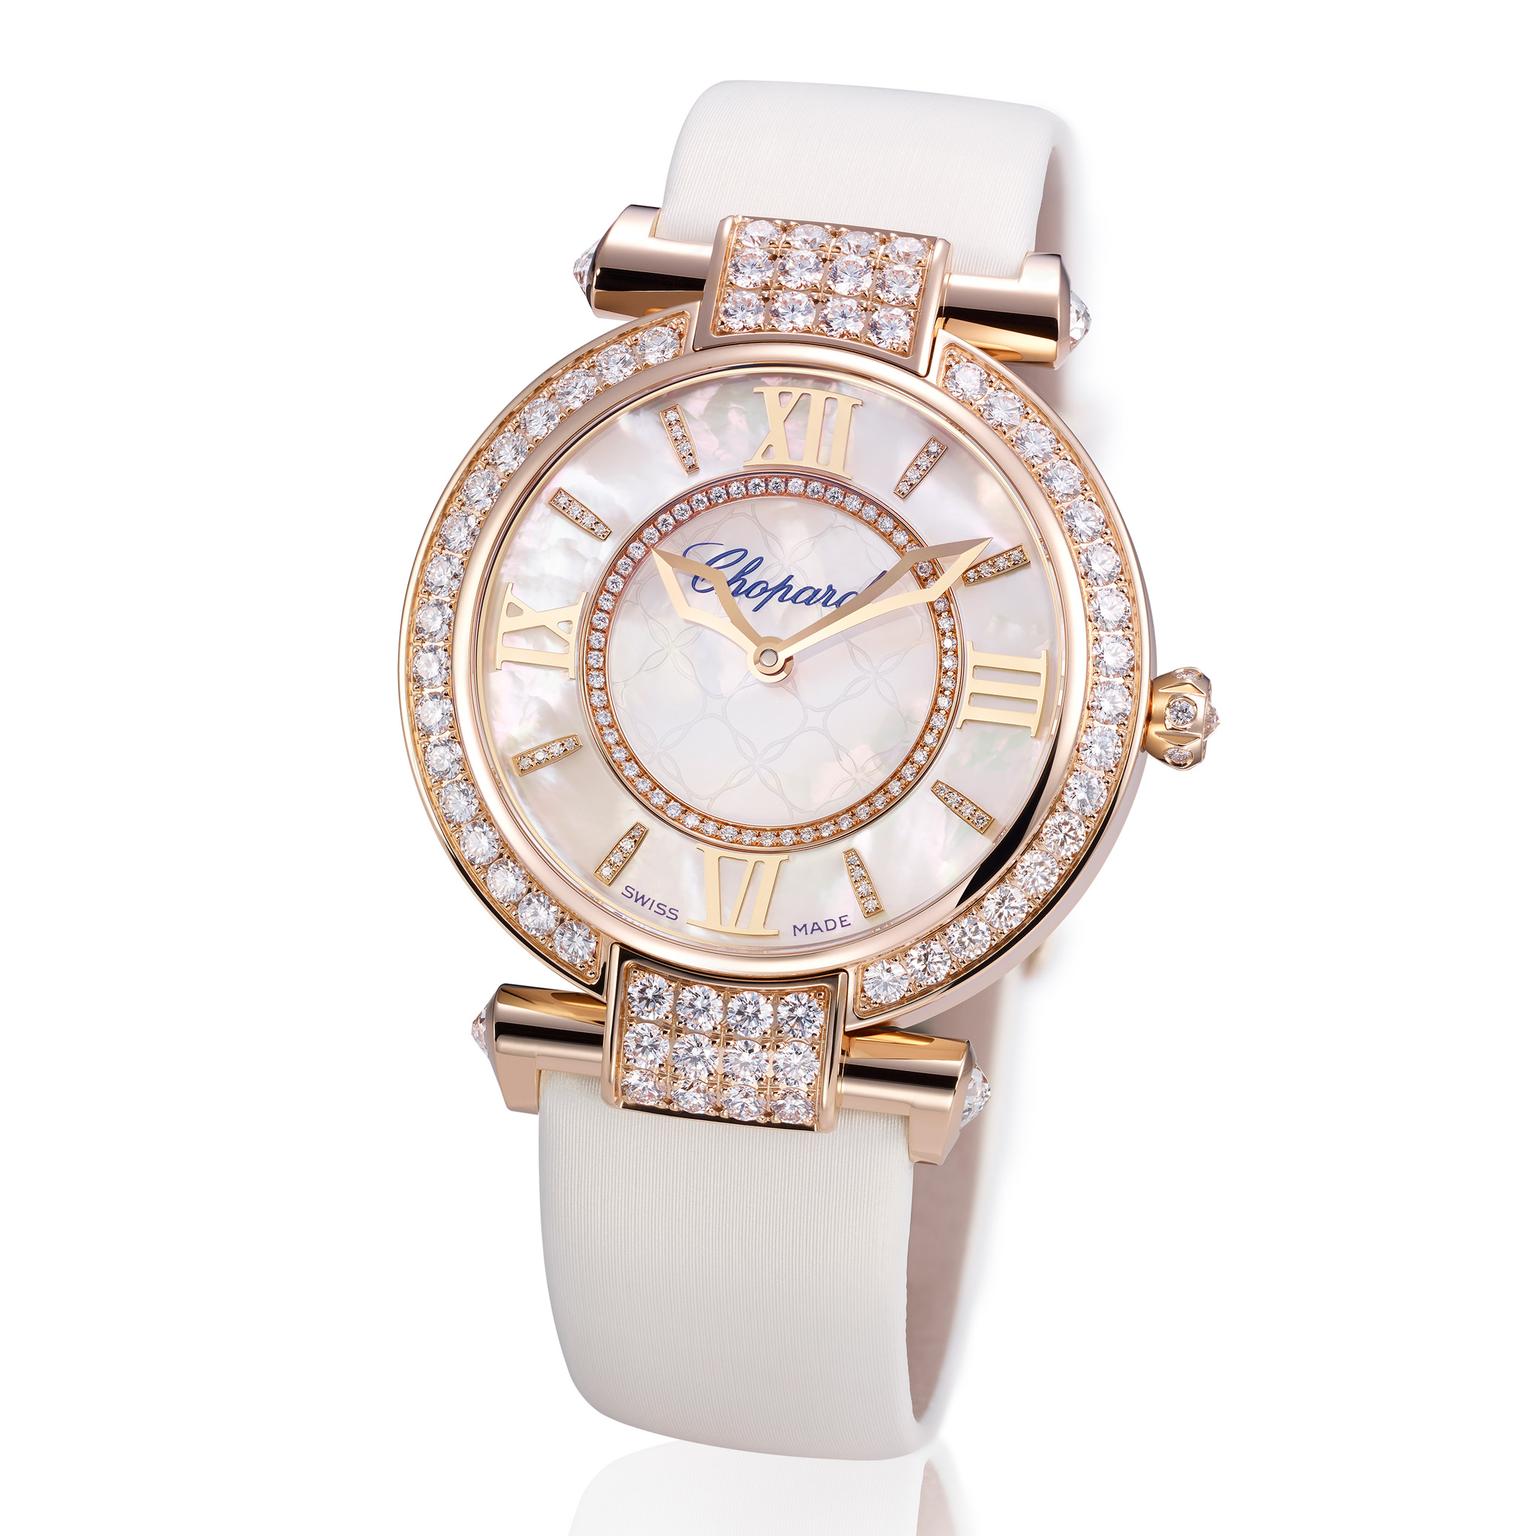 Chopard-Imperiale-White-Watch-Zoom